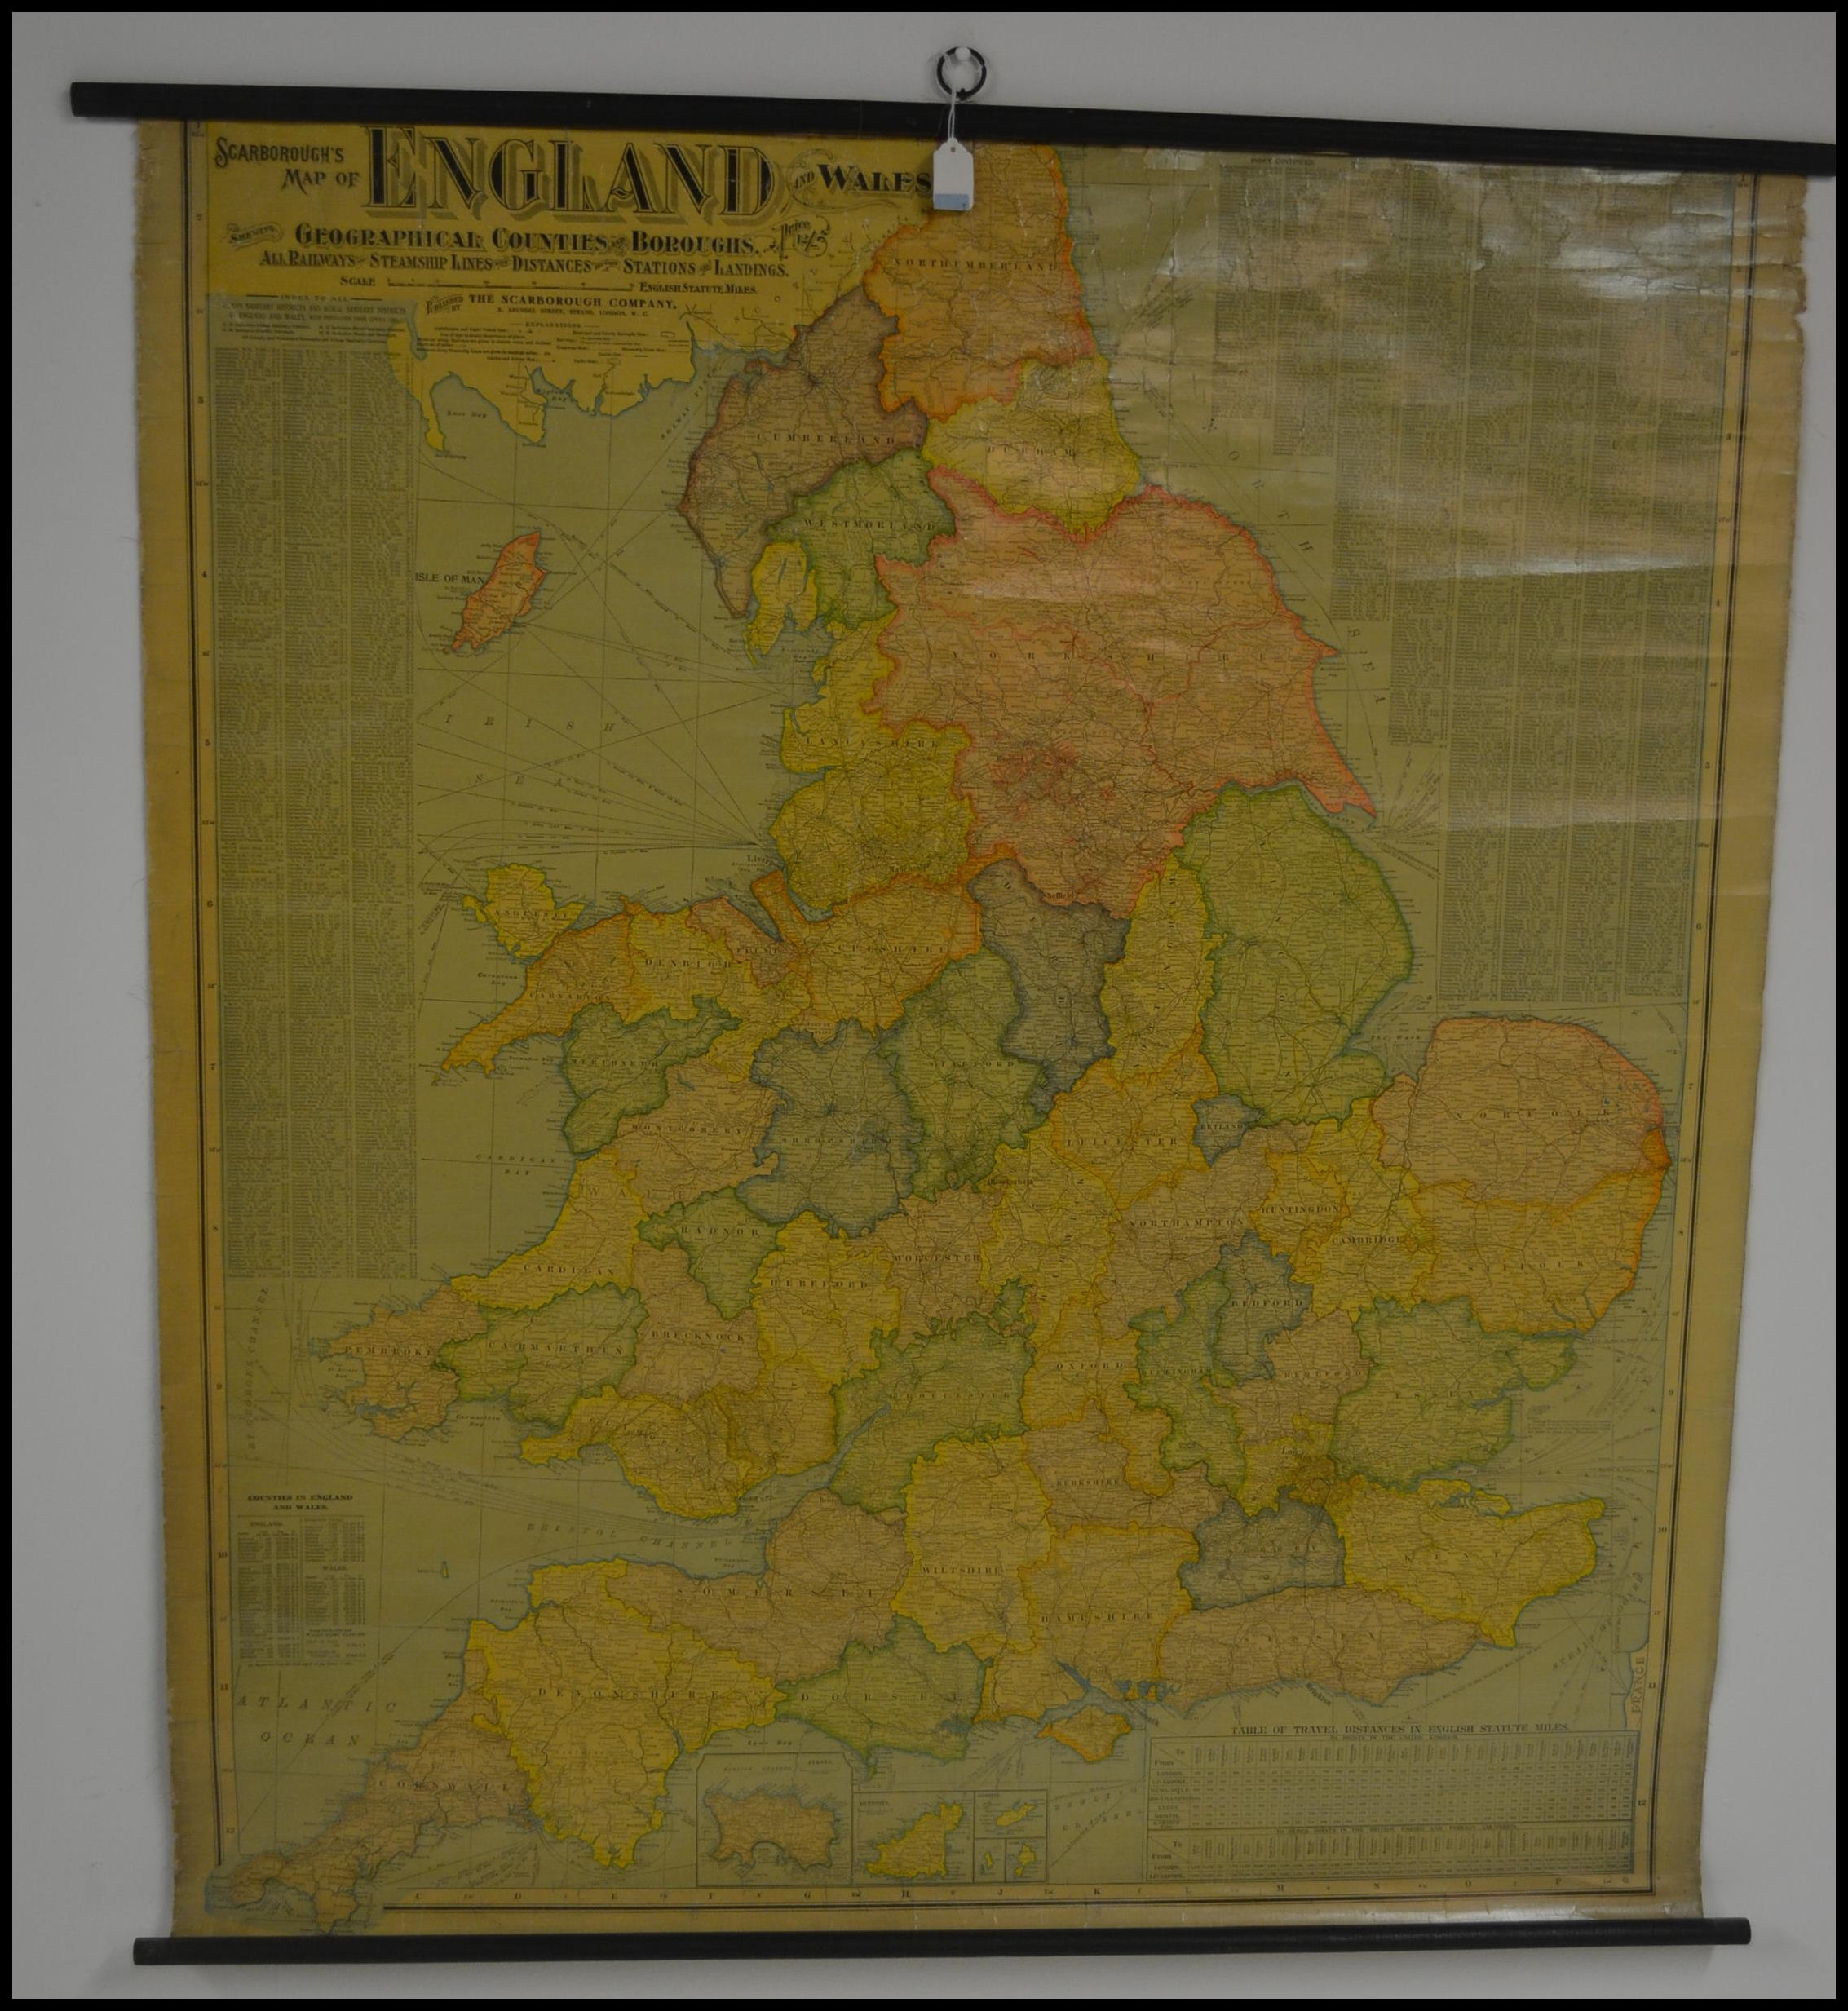 A Vintage Scarborough map of England and wales showing Geographical Counties and Boroughs, all - Image 6 of 8